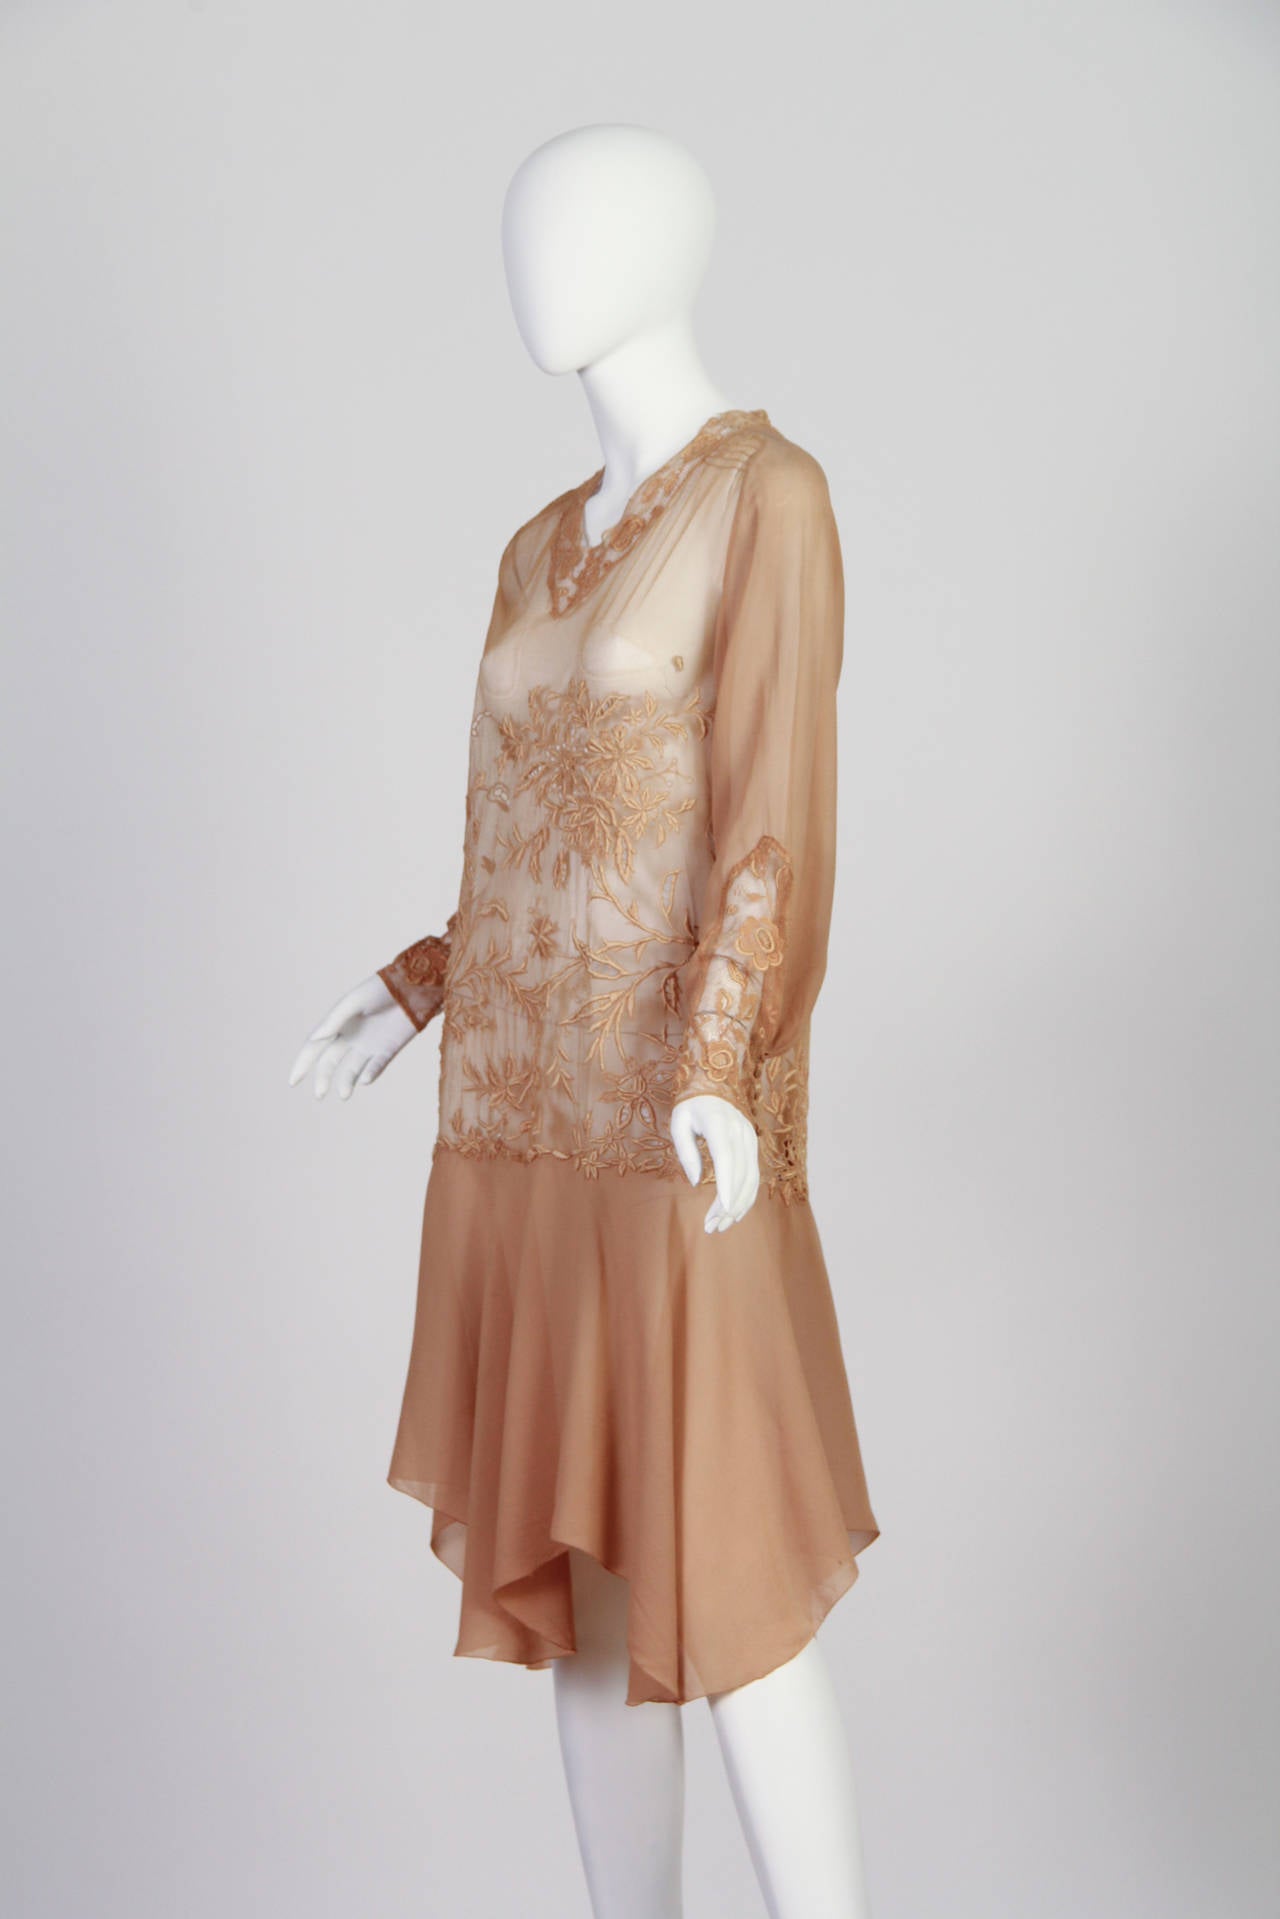 Beige Very Fine Hand Embroidered Lace, Net, and Silk Dress